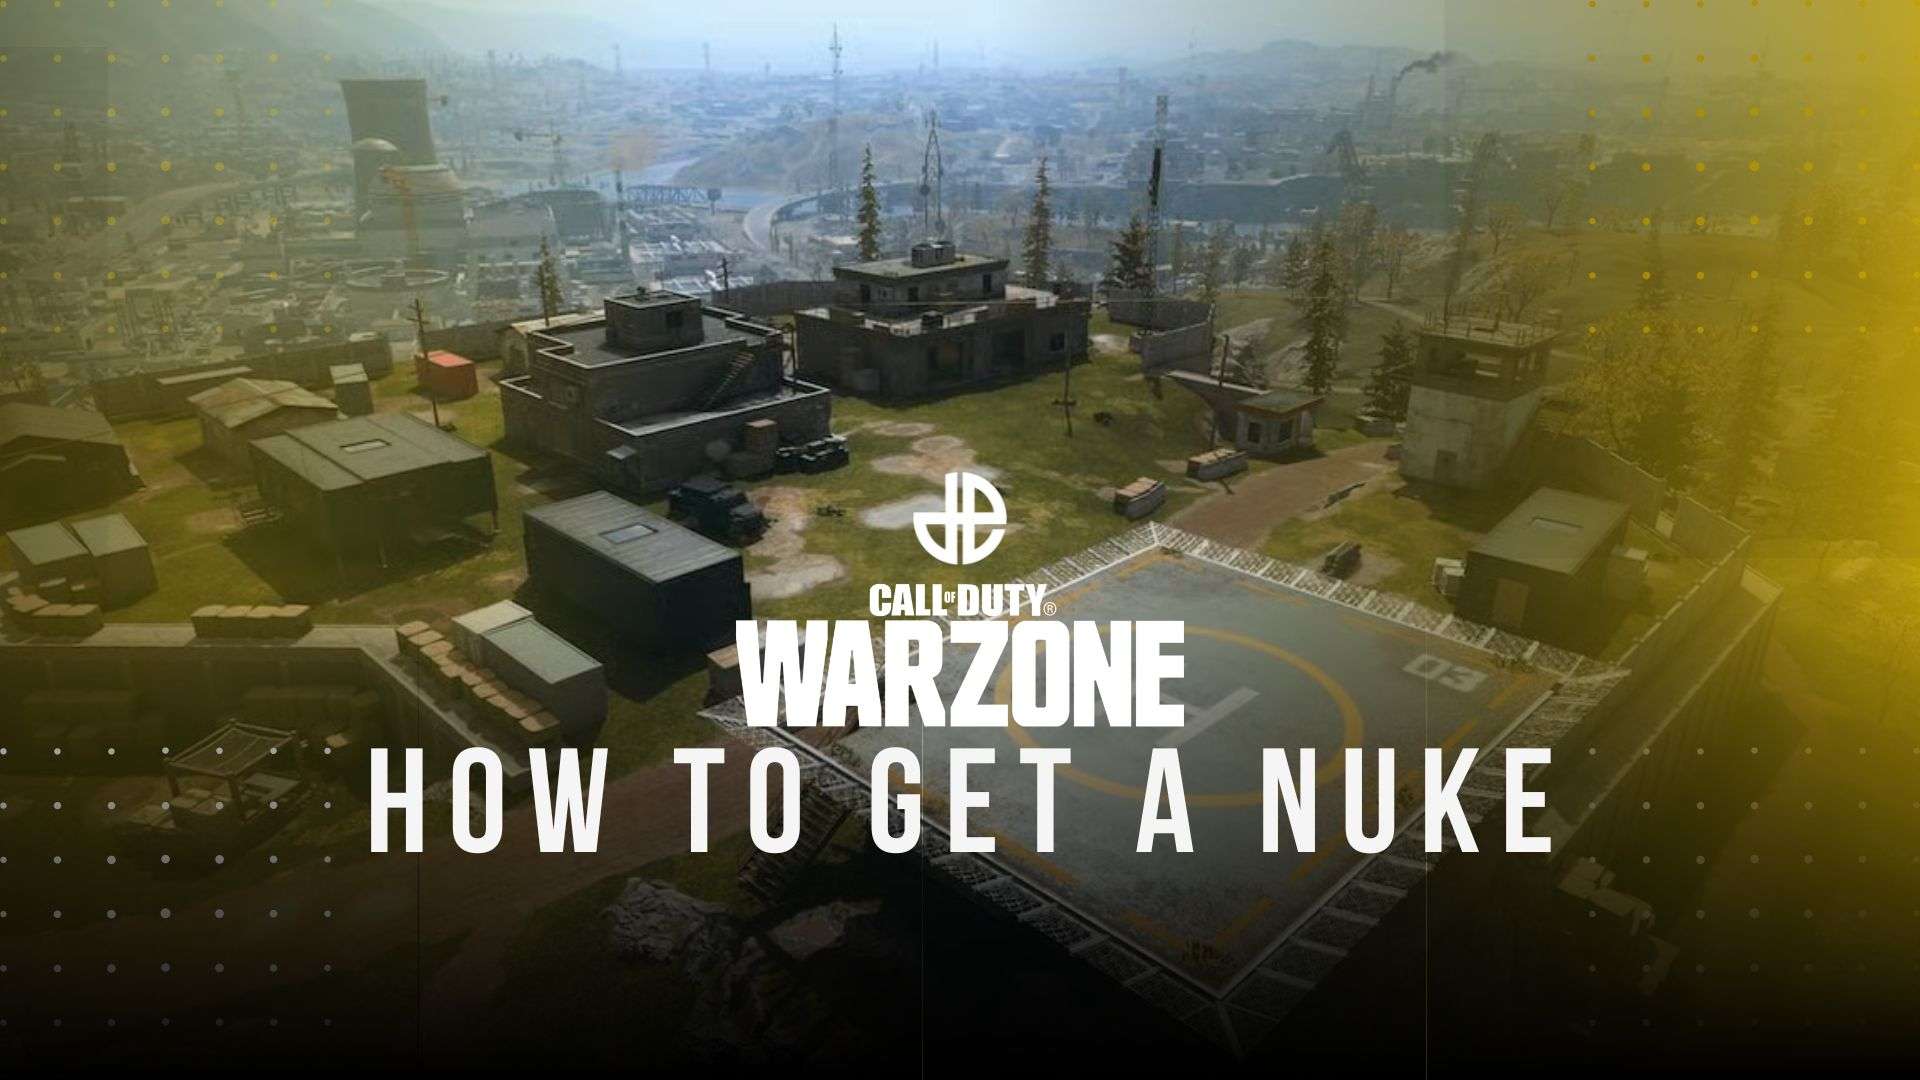 Urzikstan map in Warzone with yellow and white text around it